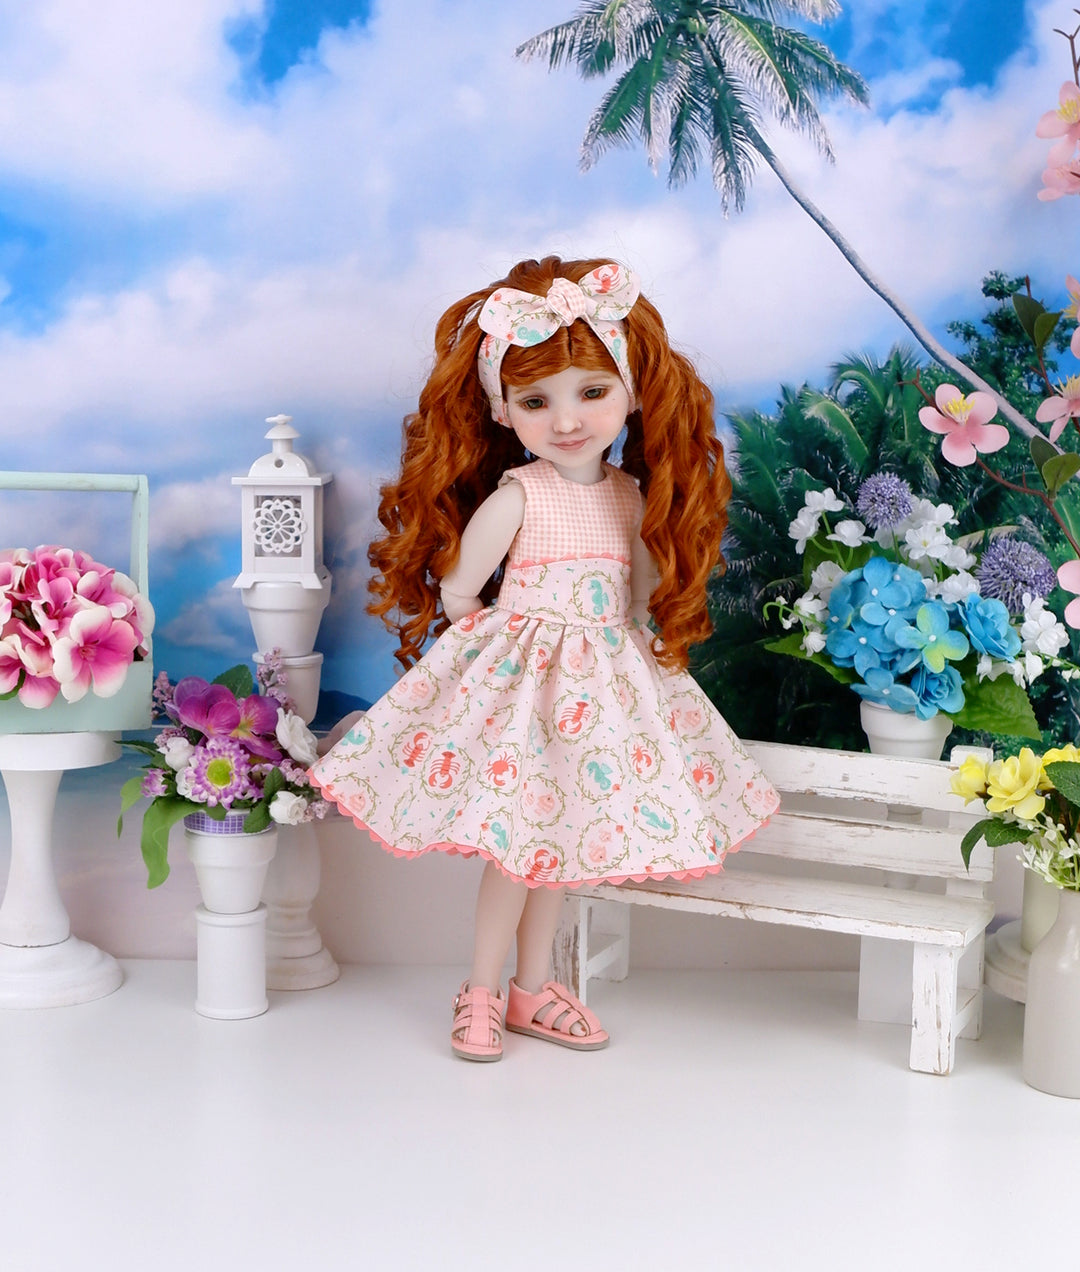 Summer Sealife - dress and sandals for Ruby Red Fashion Friends doll